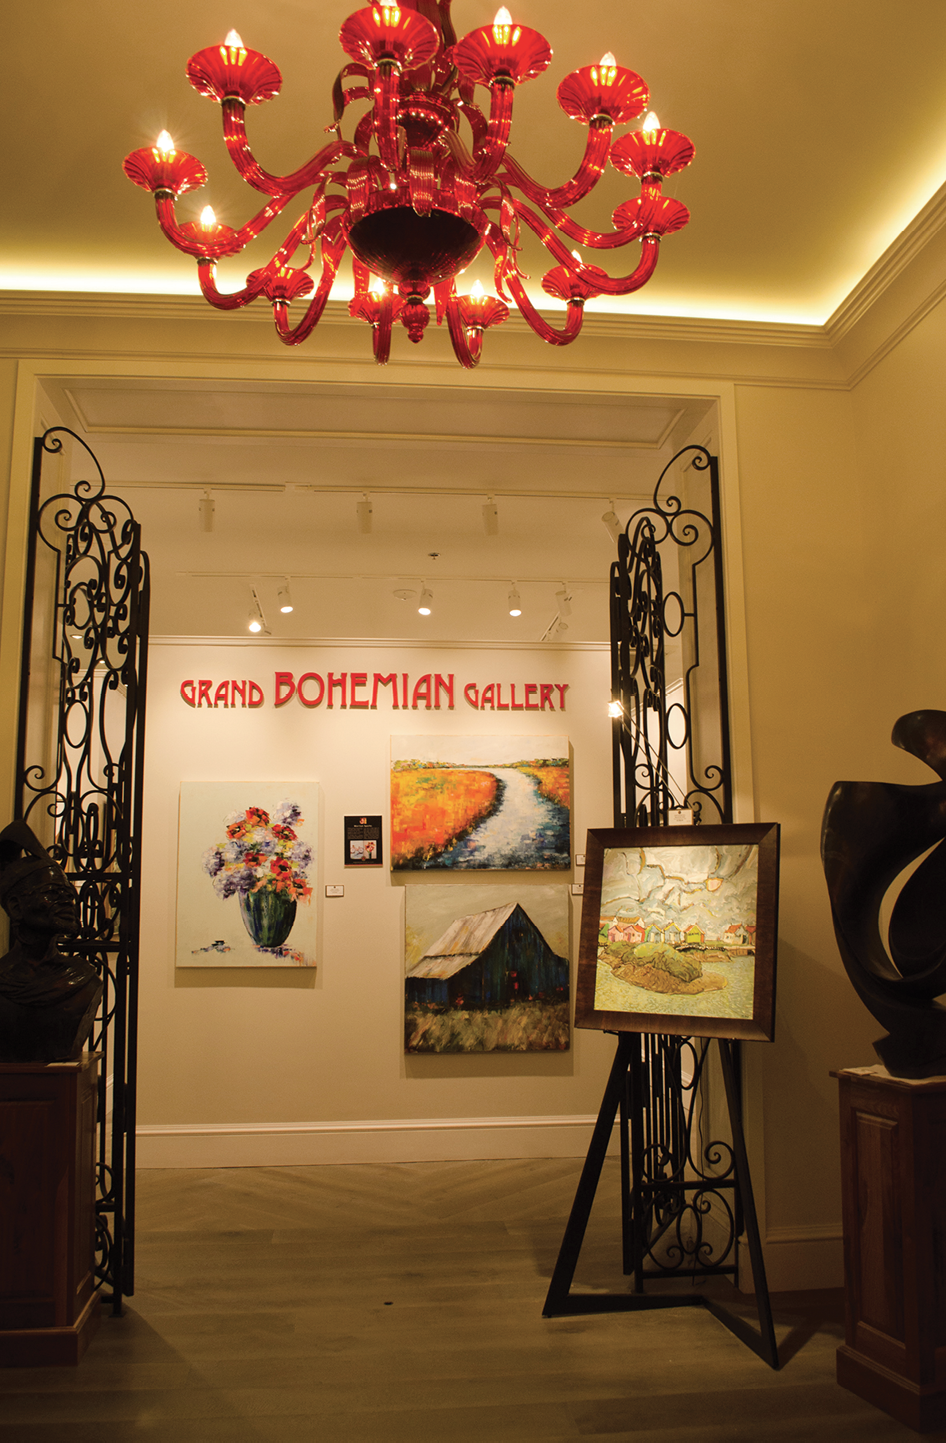 The gallery at Grand Bohemian on Wentworth are among the hotel’s amenities that locals can enjoy, too.